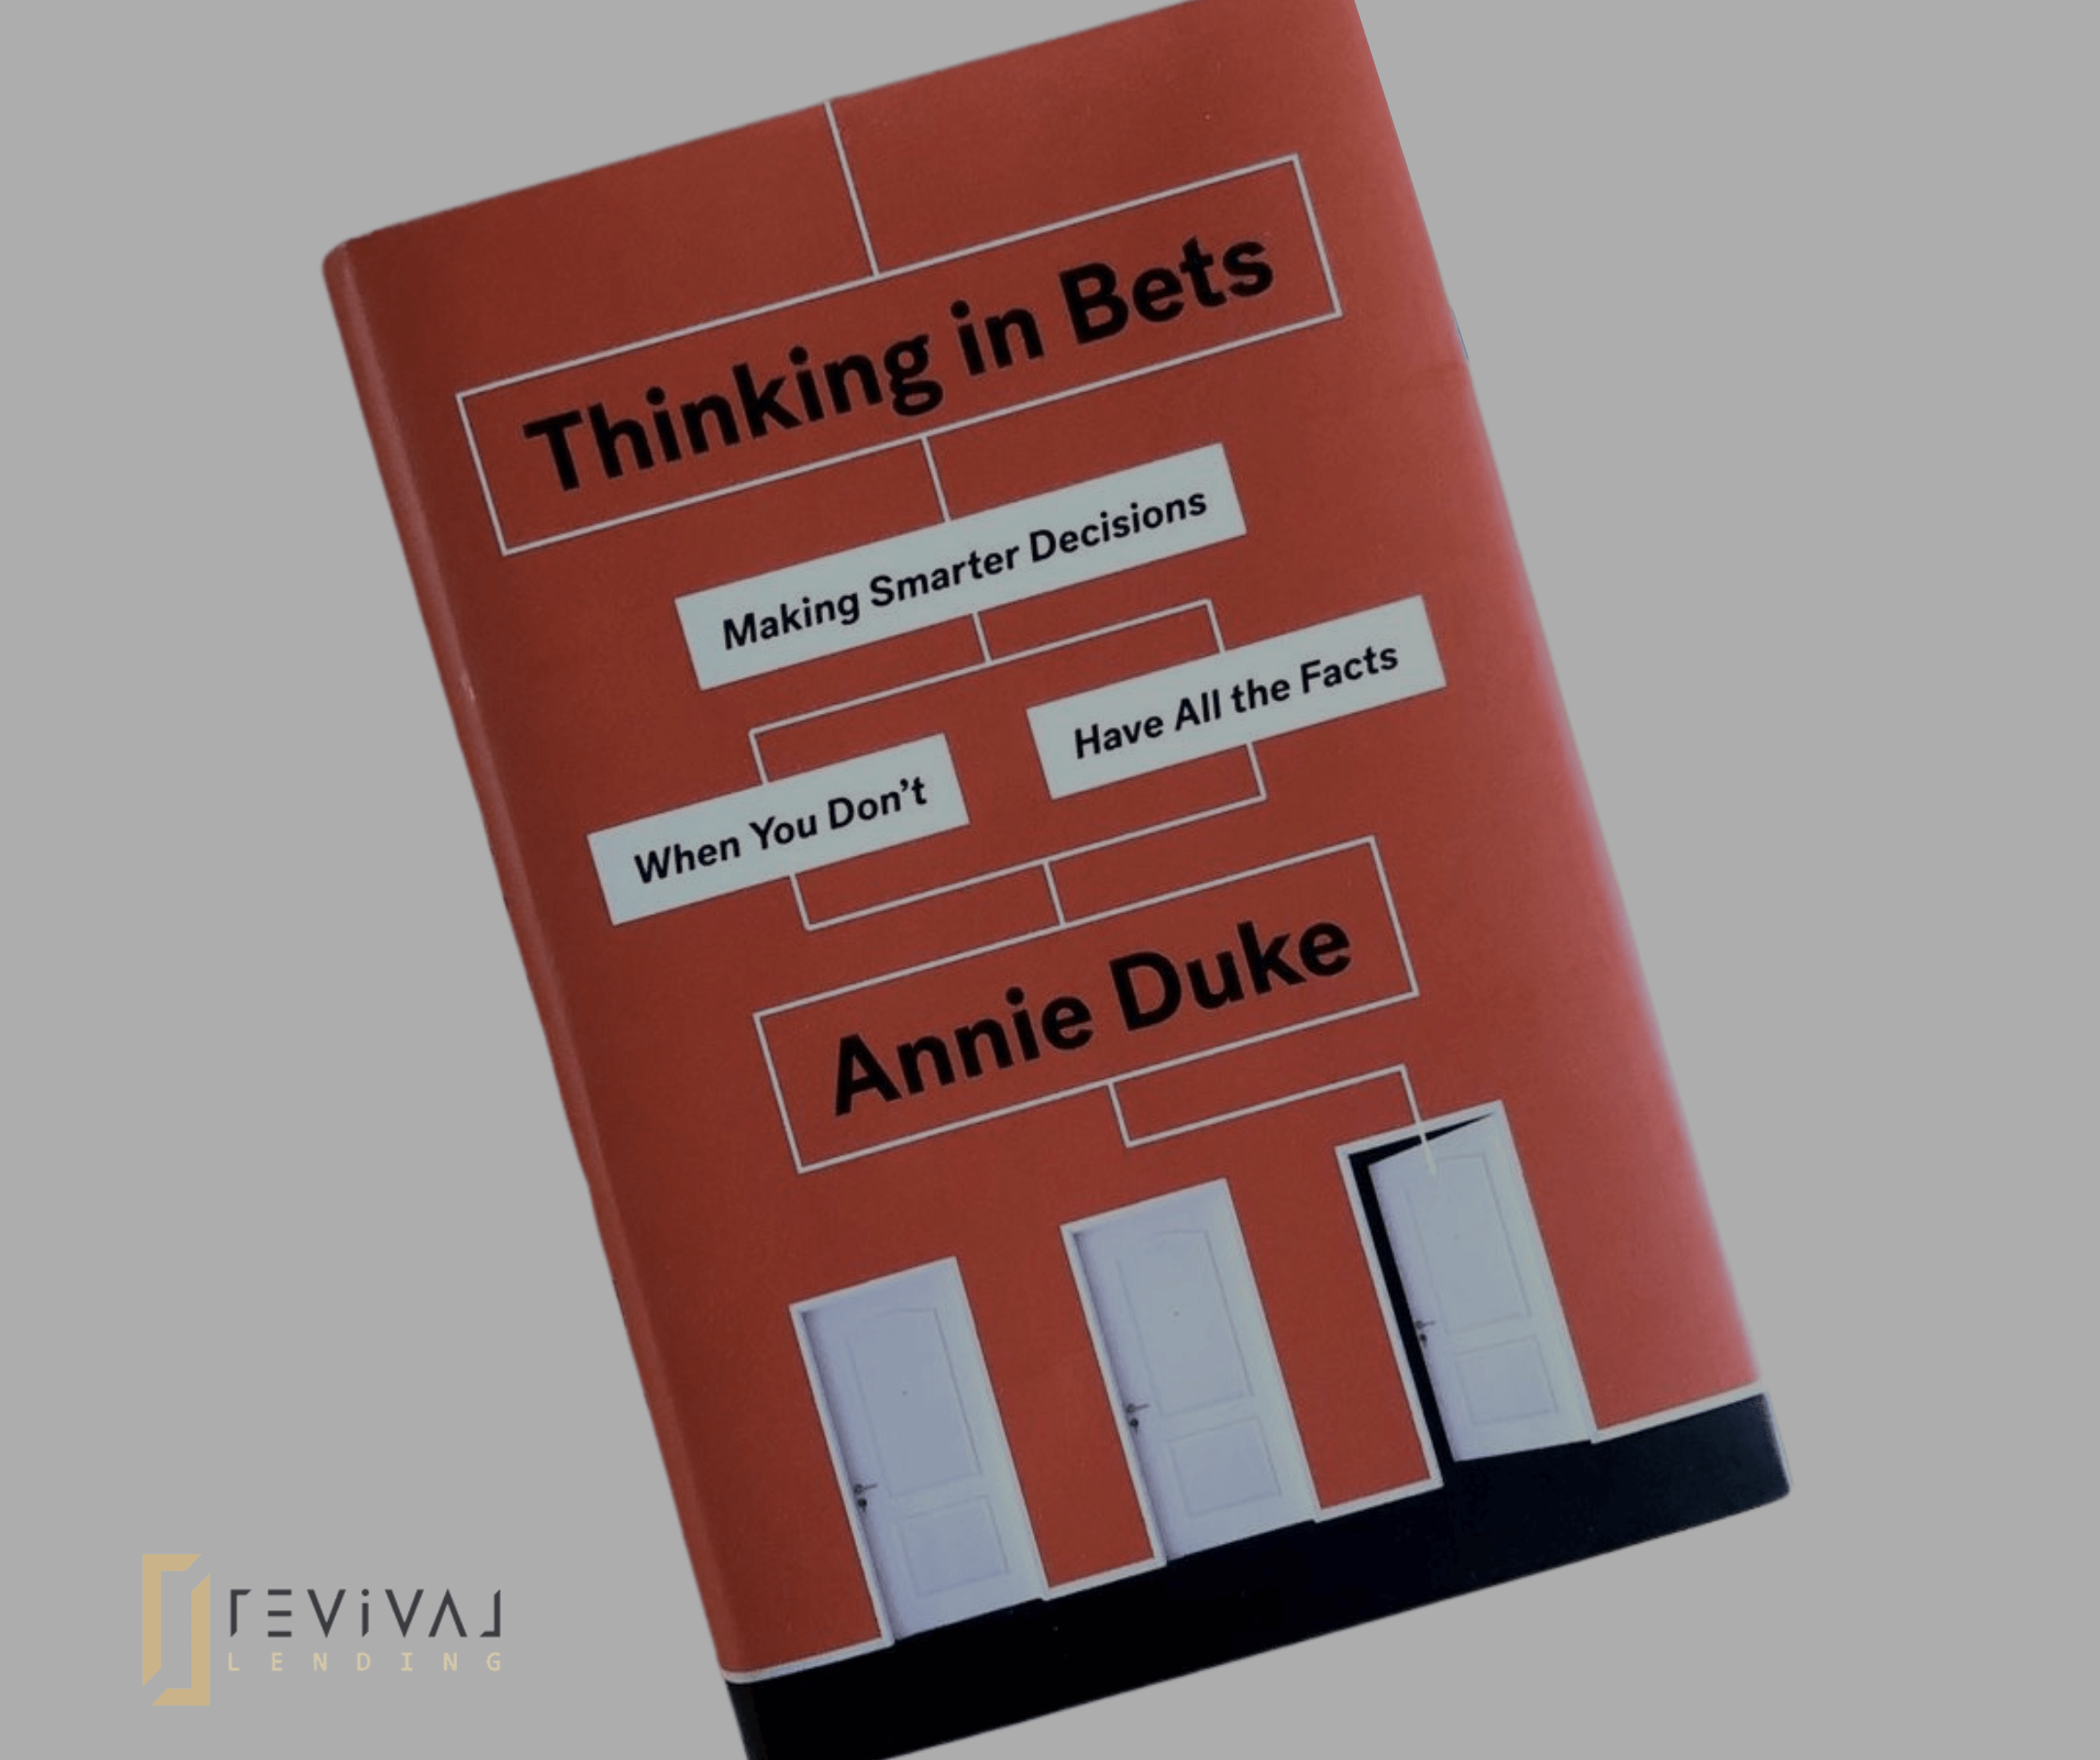 Thinking in Bets: Making Smarter Decisions When You Don’t Have All the Facts - Annie Duke, author